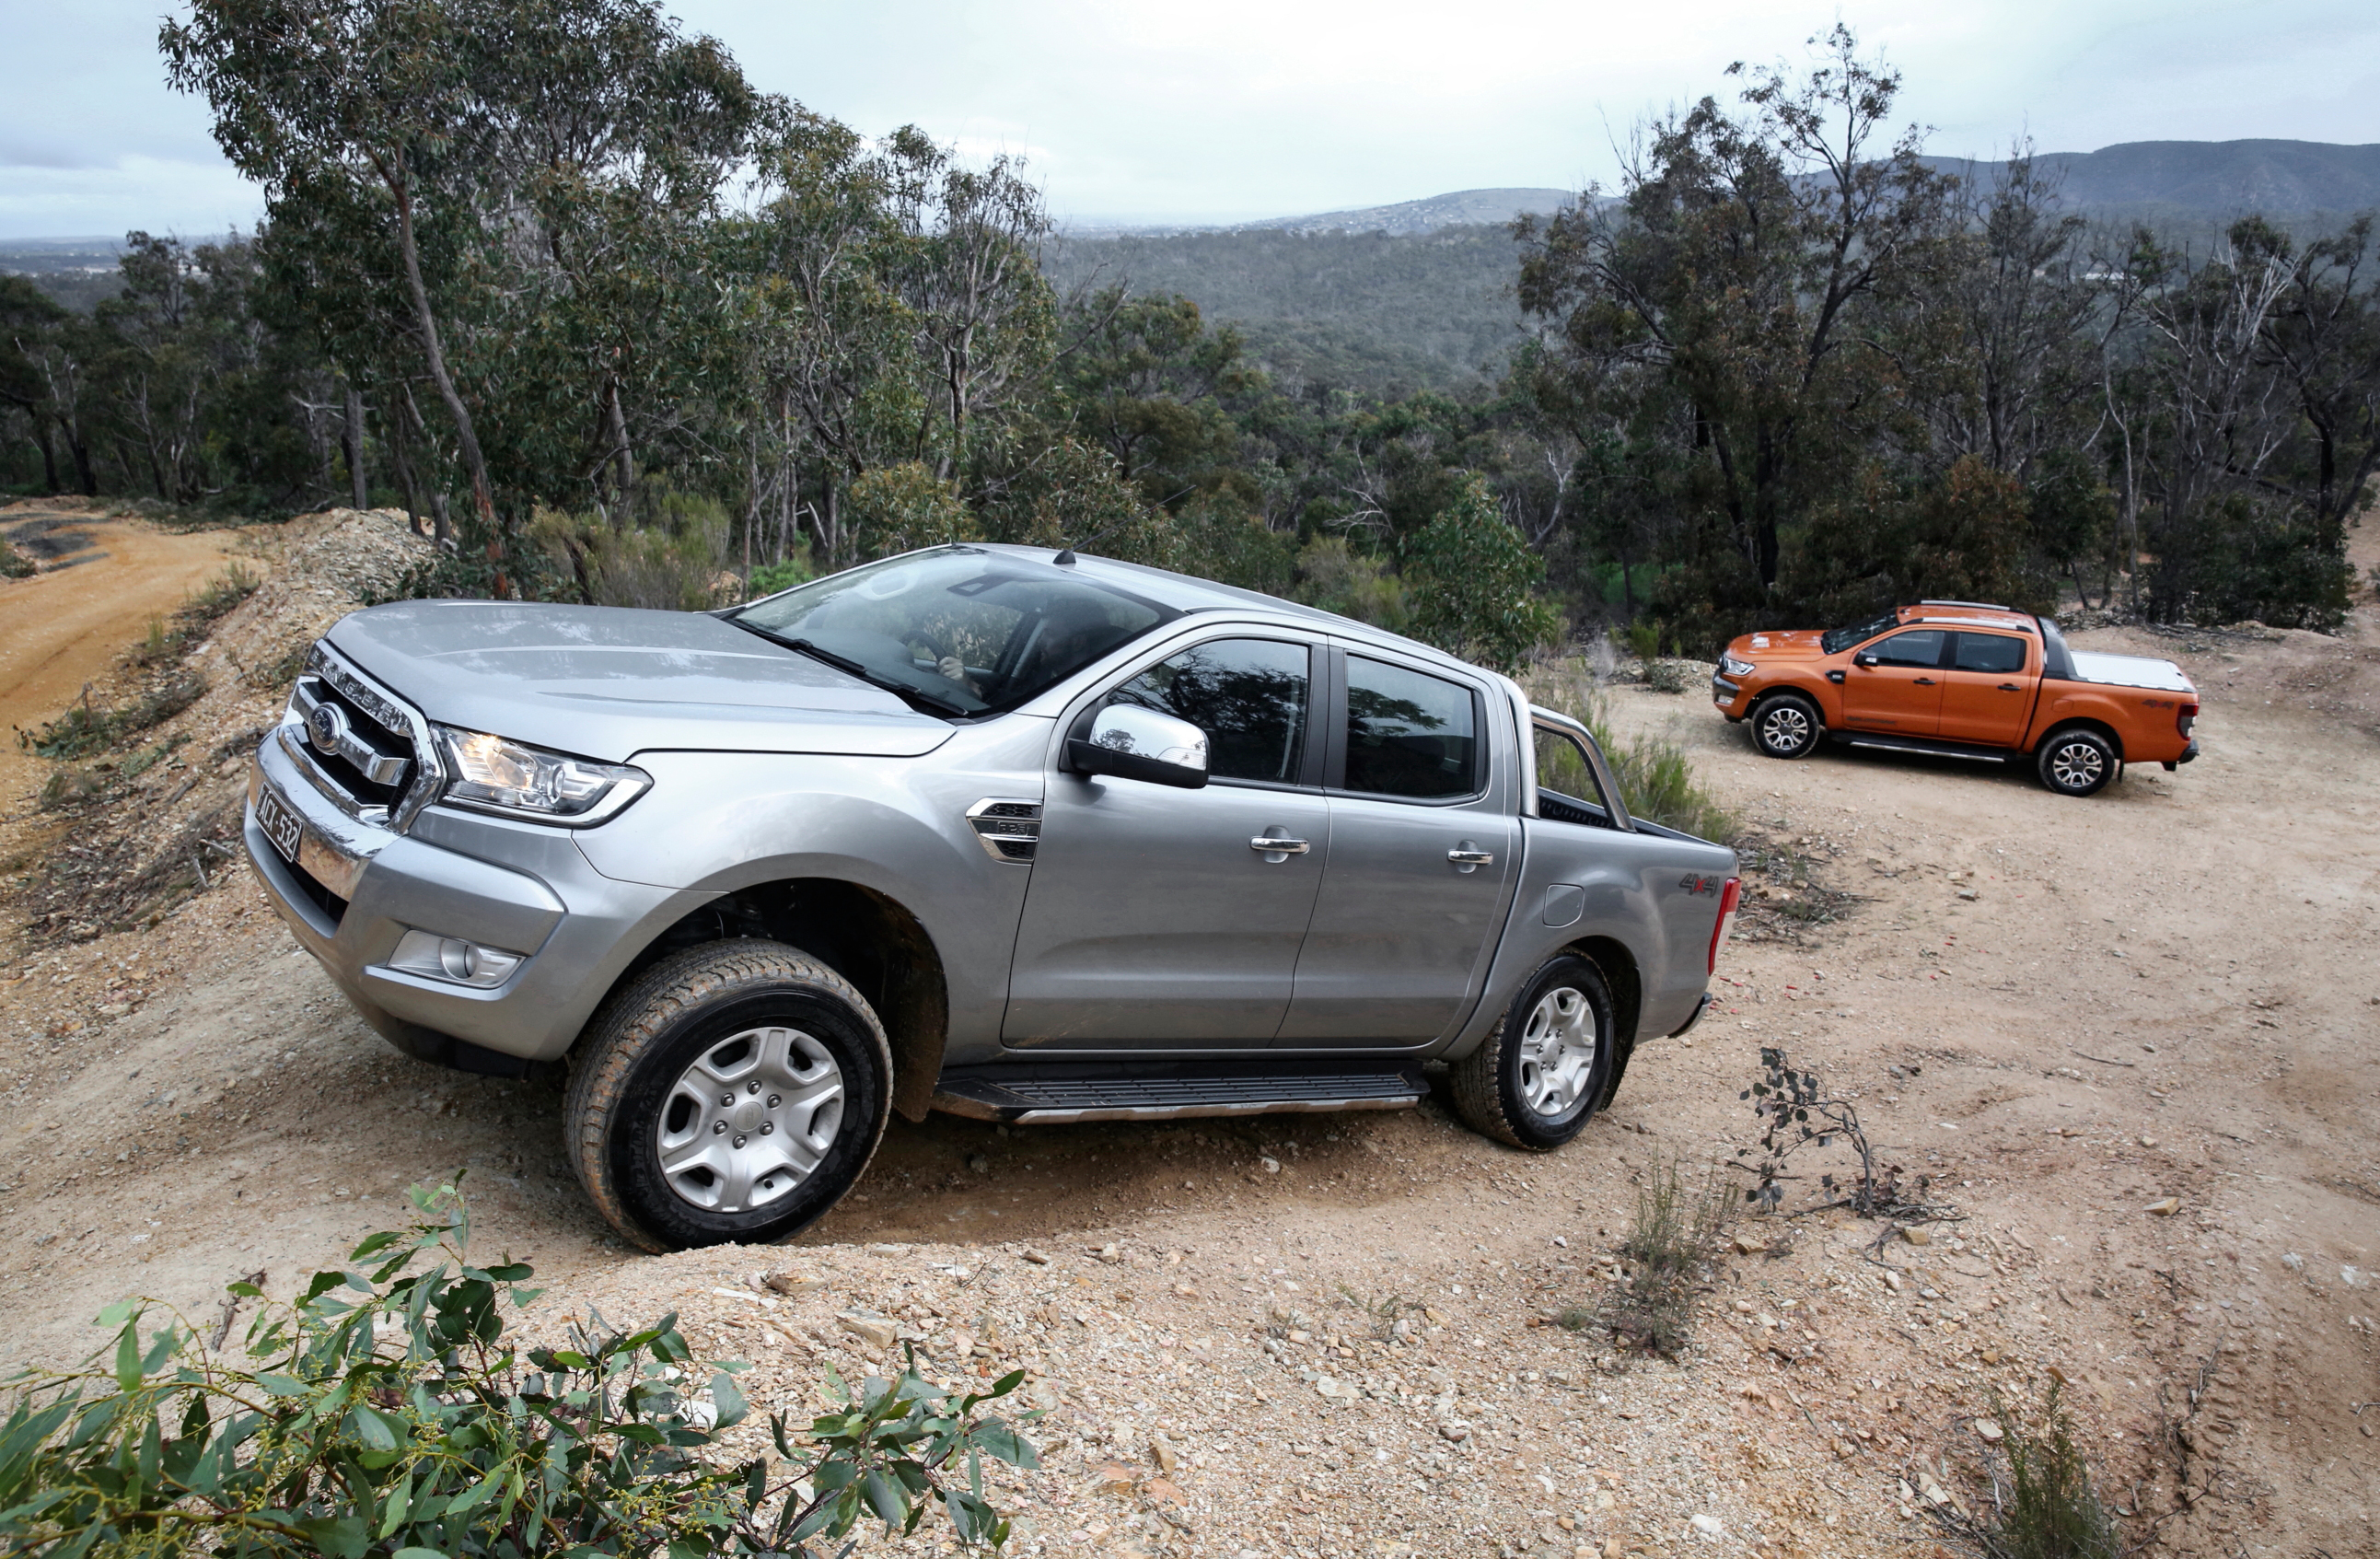 Review - 2017 Ford Ranger - Review